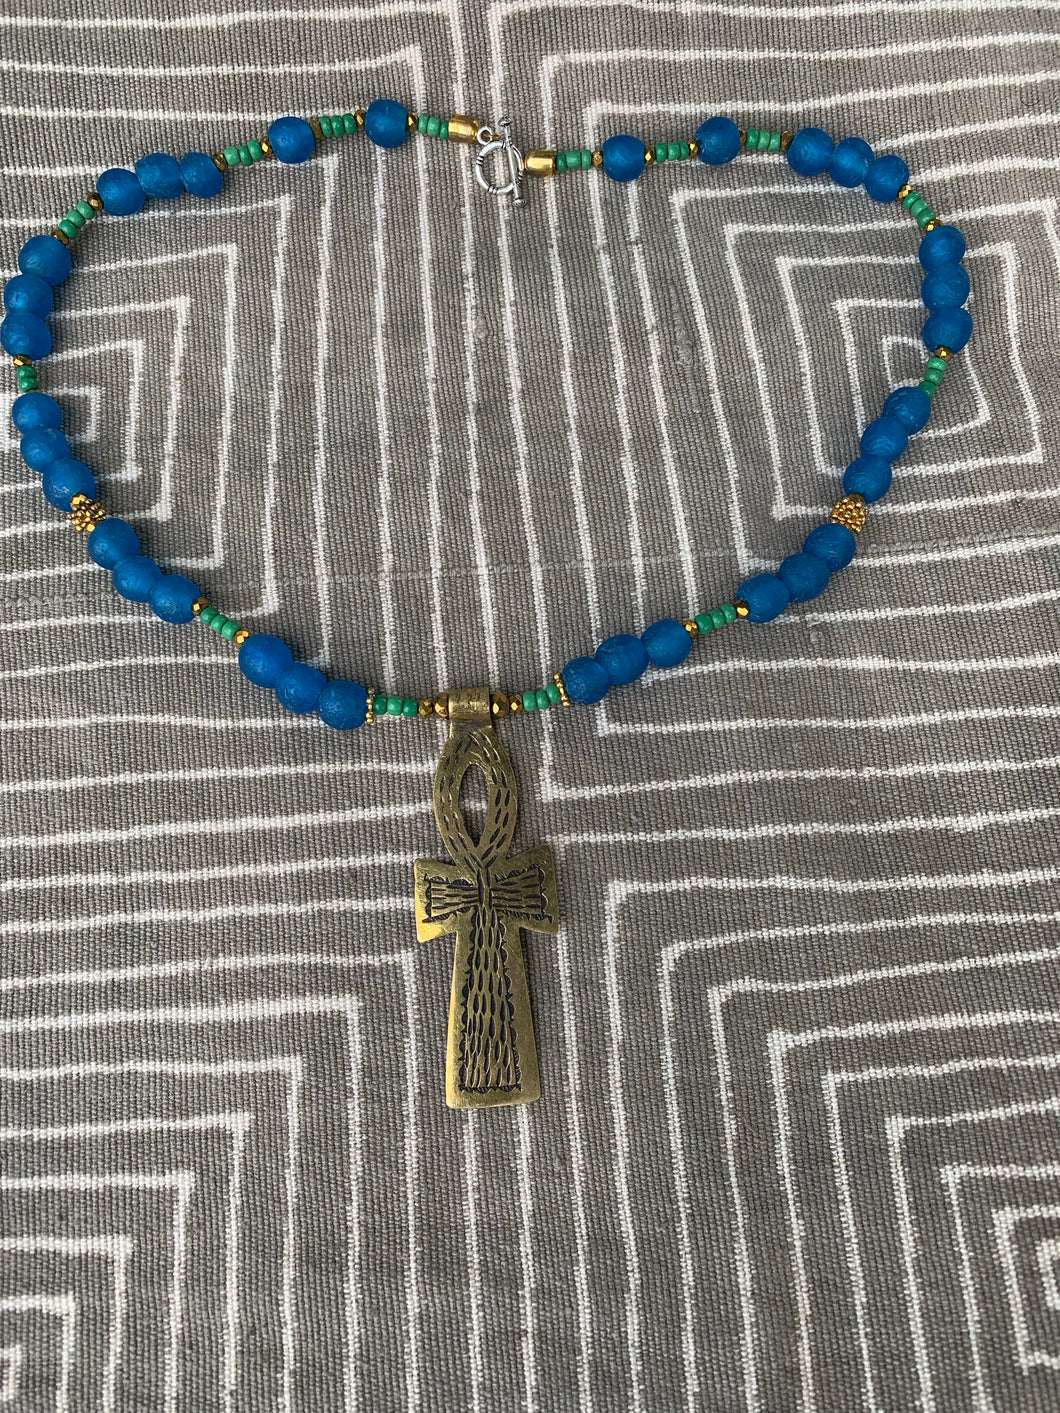 Handcrafted Male NecklaceSARAMANI HOUSE 